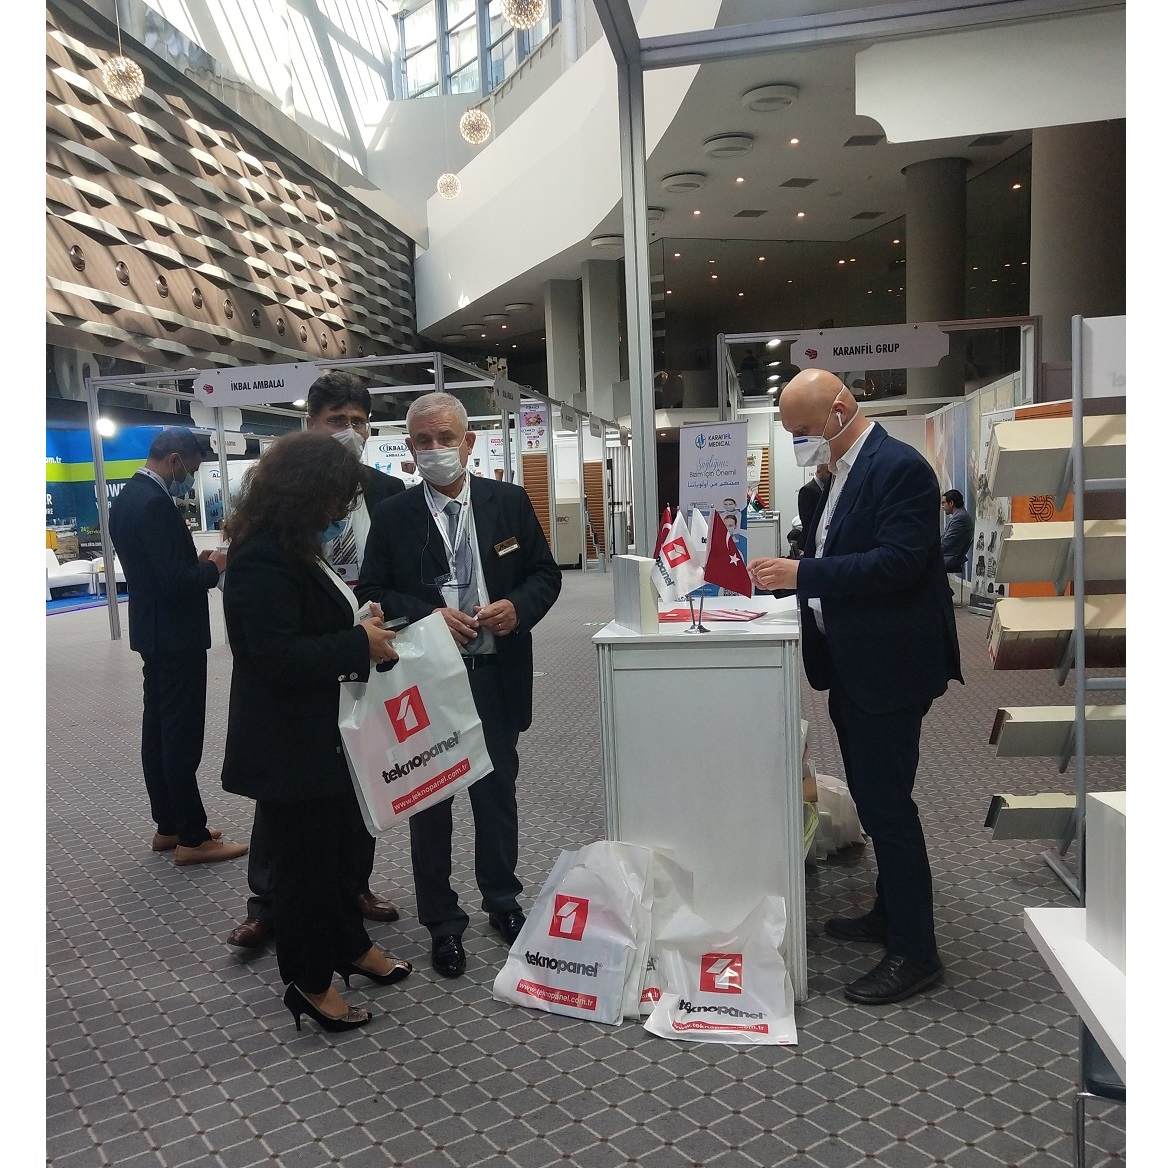 We hosted the senior business men and bureaucrats of Libya at our stand